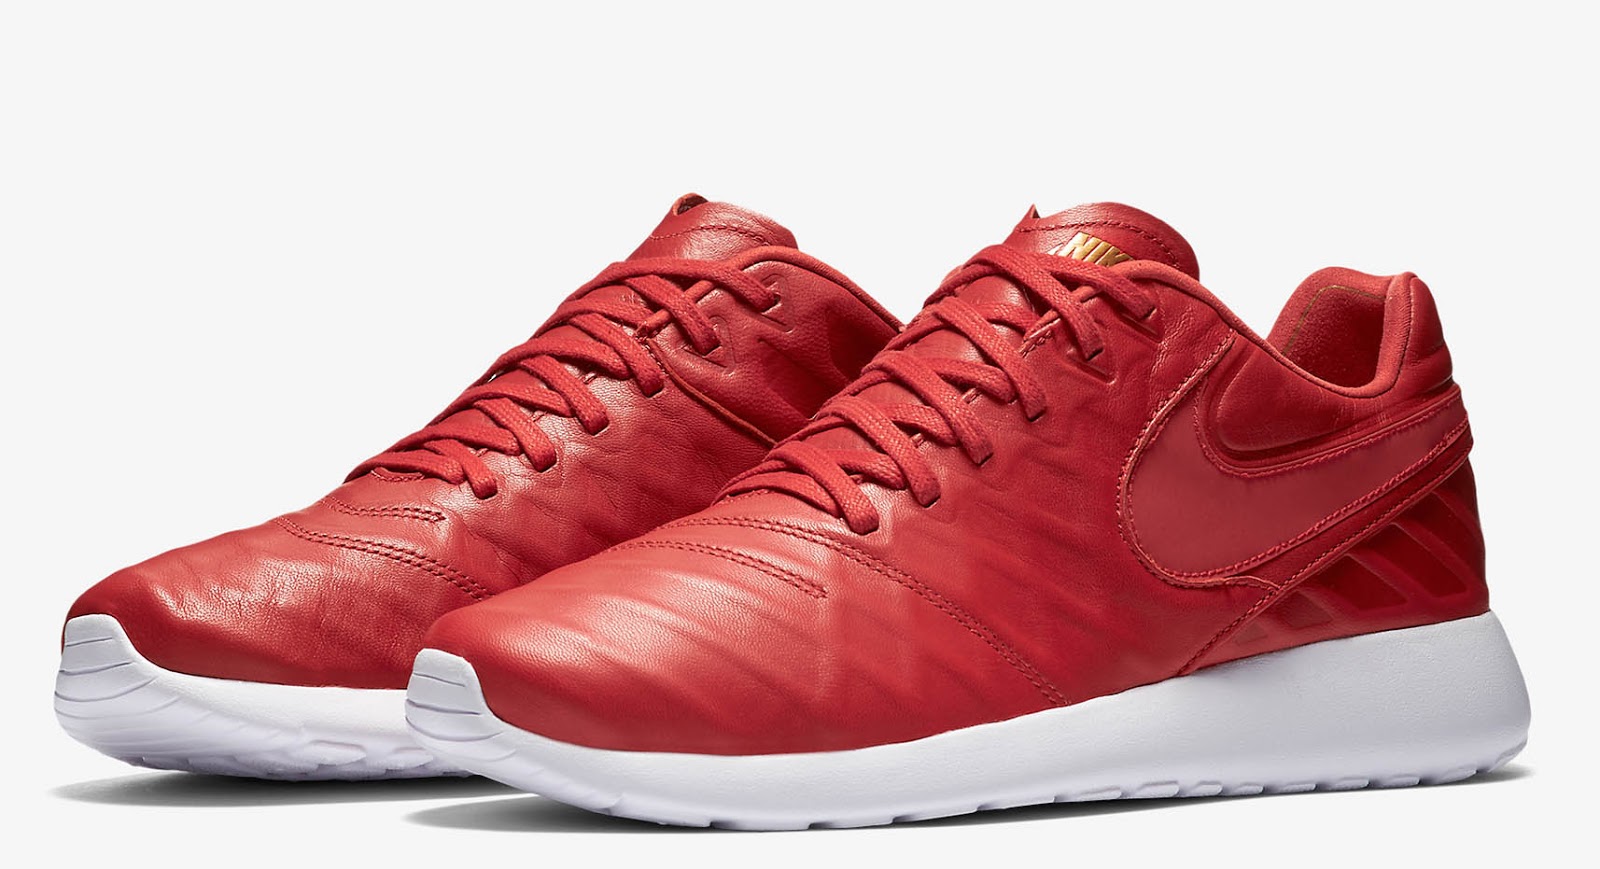 Reflective University Red Nike Roshe Tiempo VI Boots Released - Footy ...